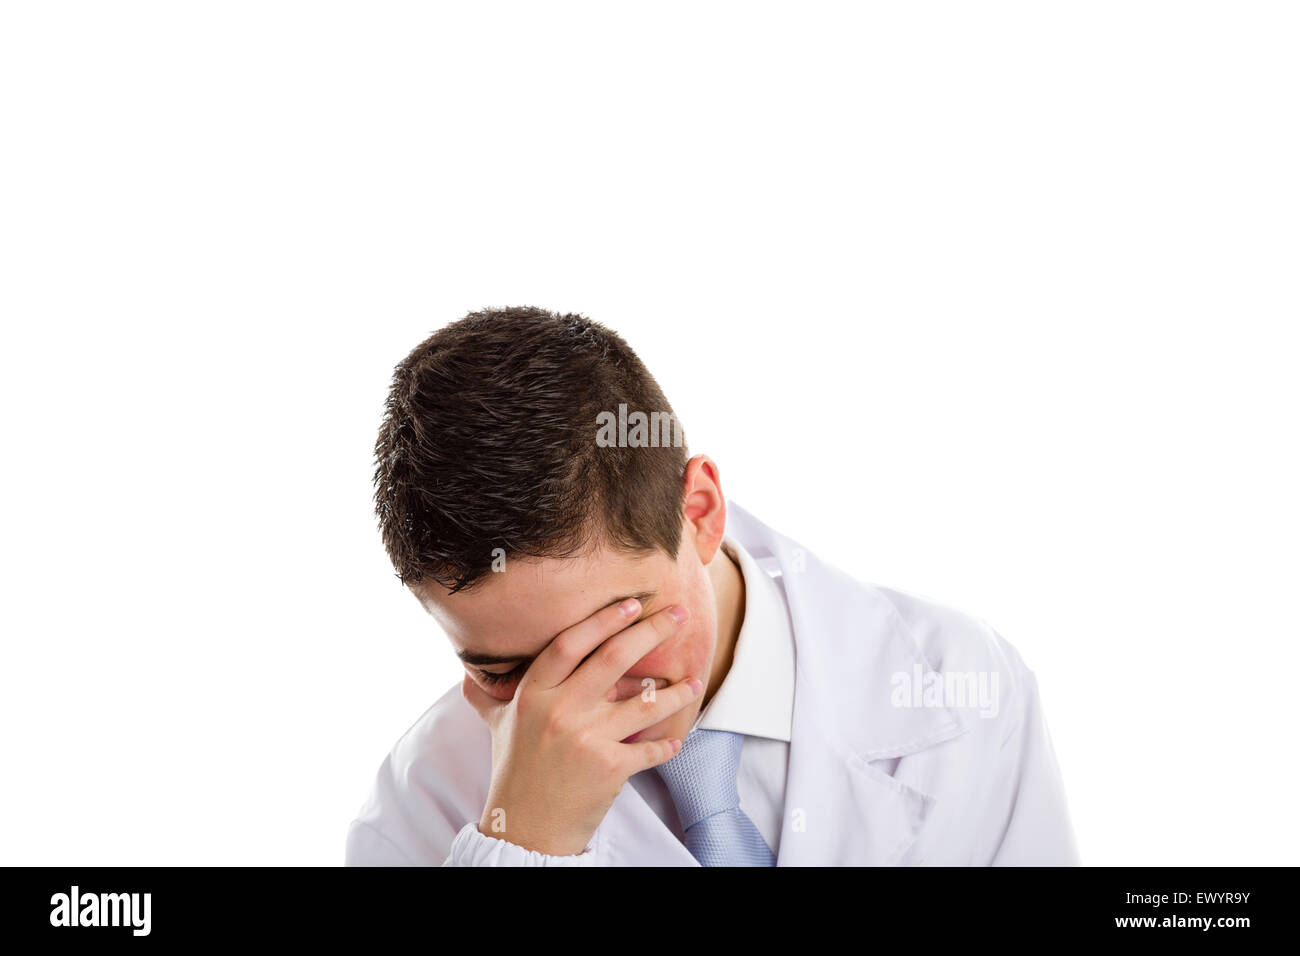 A boy doctor in white coat and blue tie helps to feel medicine more friendly: he is smiling while covering his face. His acne skin has not ben retouched Stock Photo